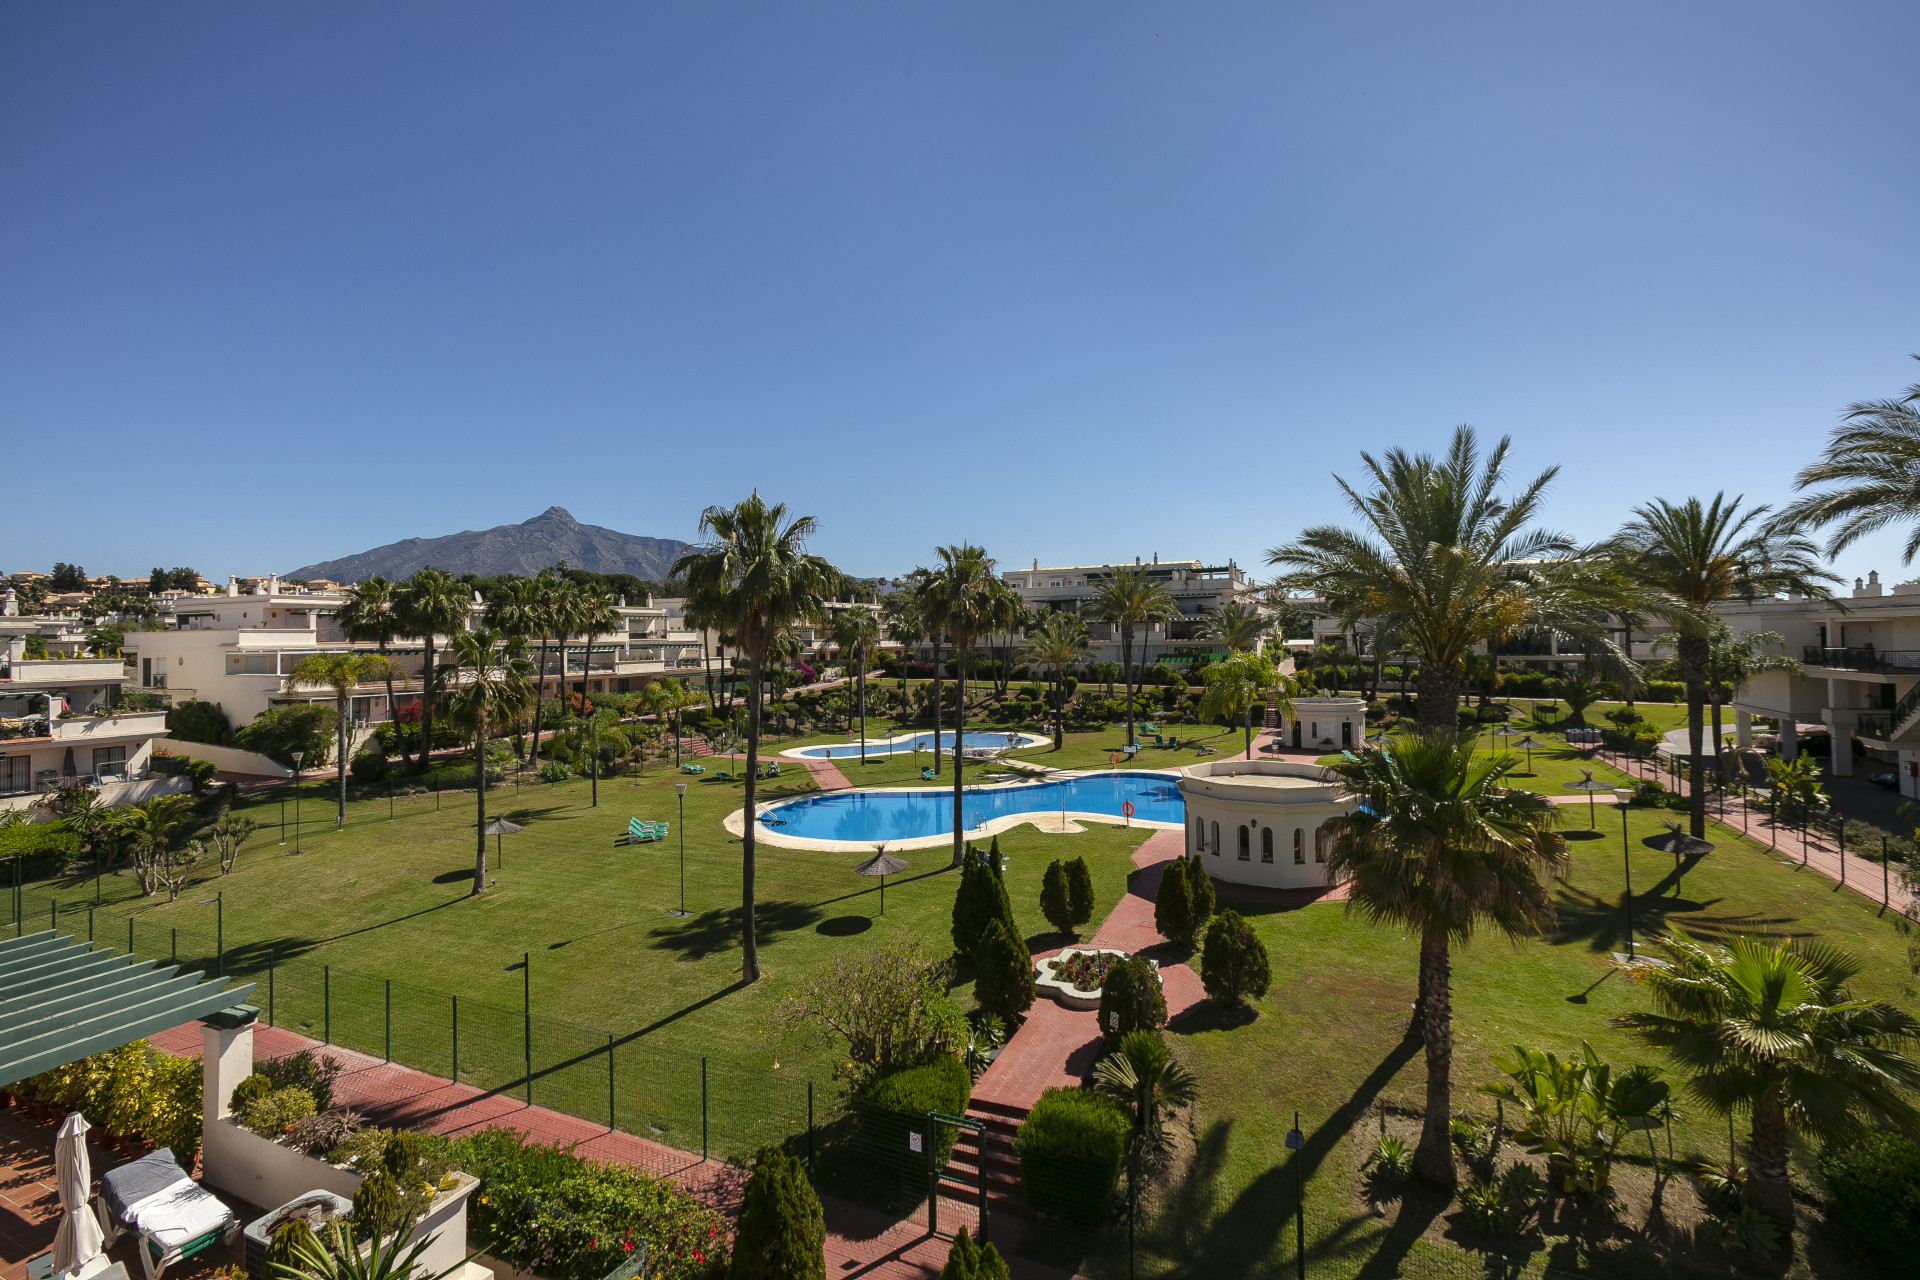 Beautiful 3 bedroom penthouse with views to the pool and mountains from a hug...